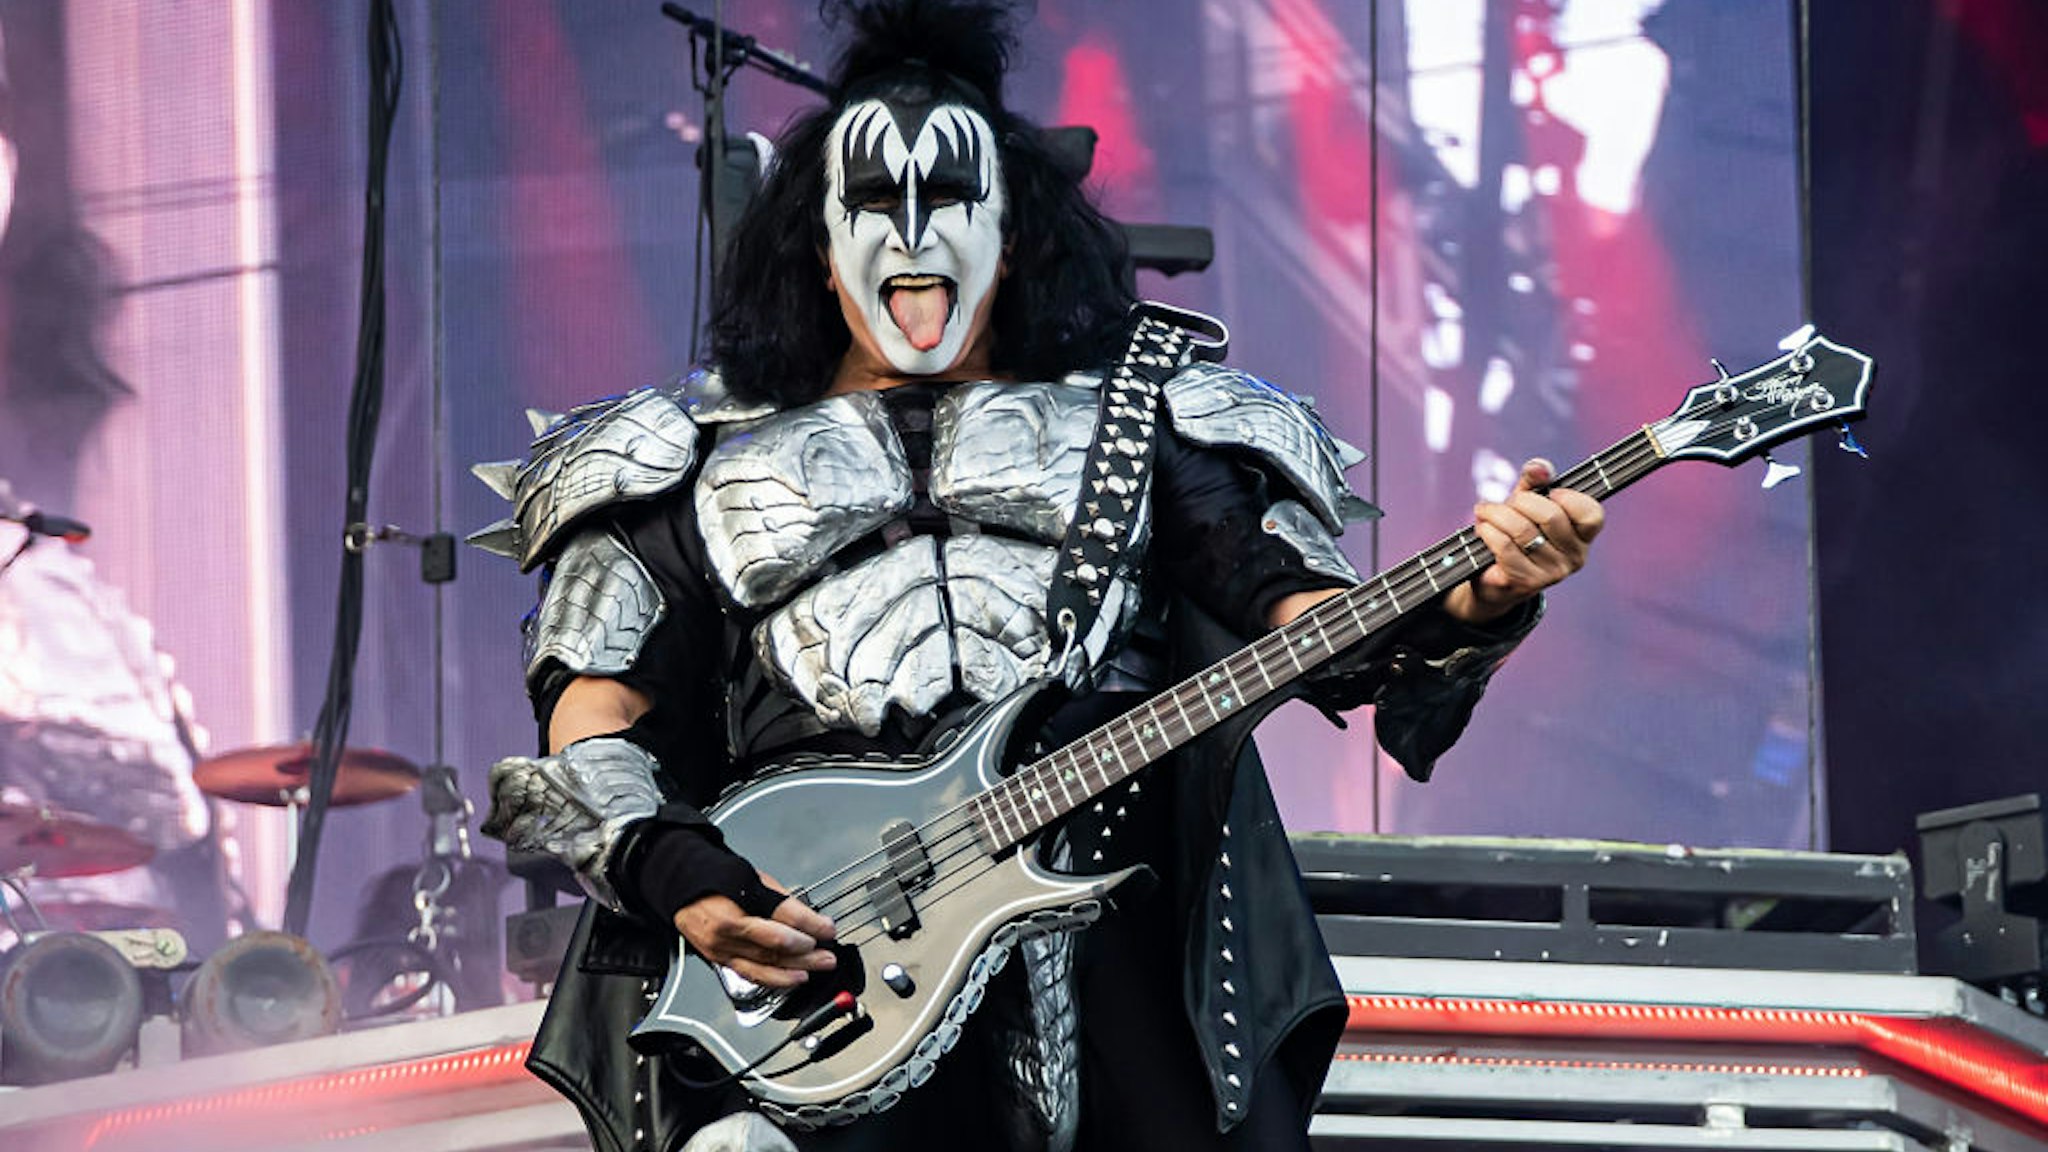 OSLO, NORWAY - JUNE 27: Gene Simmons of Kiss on stage at the Tons of Rock festival on June 27, 2019 in Oslo, Norway. (Photo by Per Ole Hagen/Redferns)